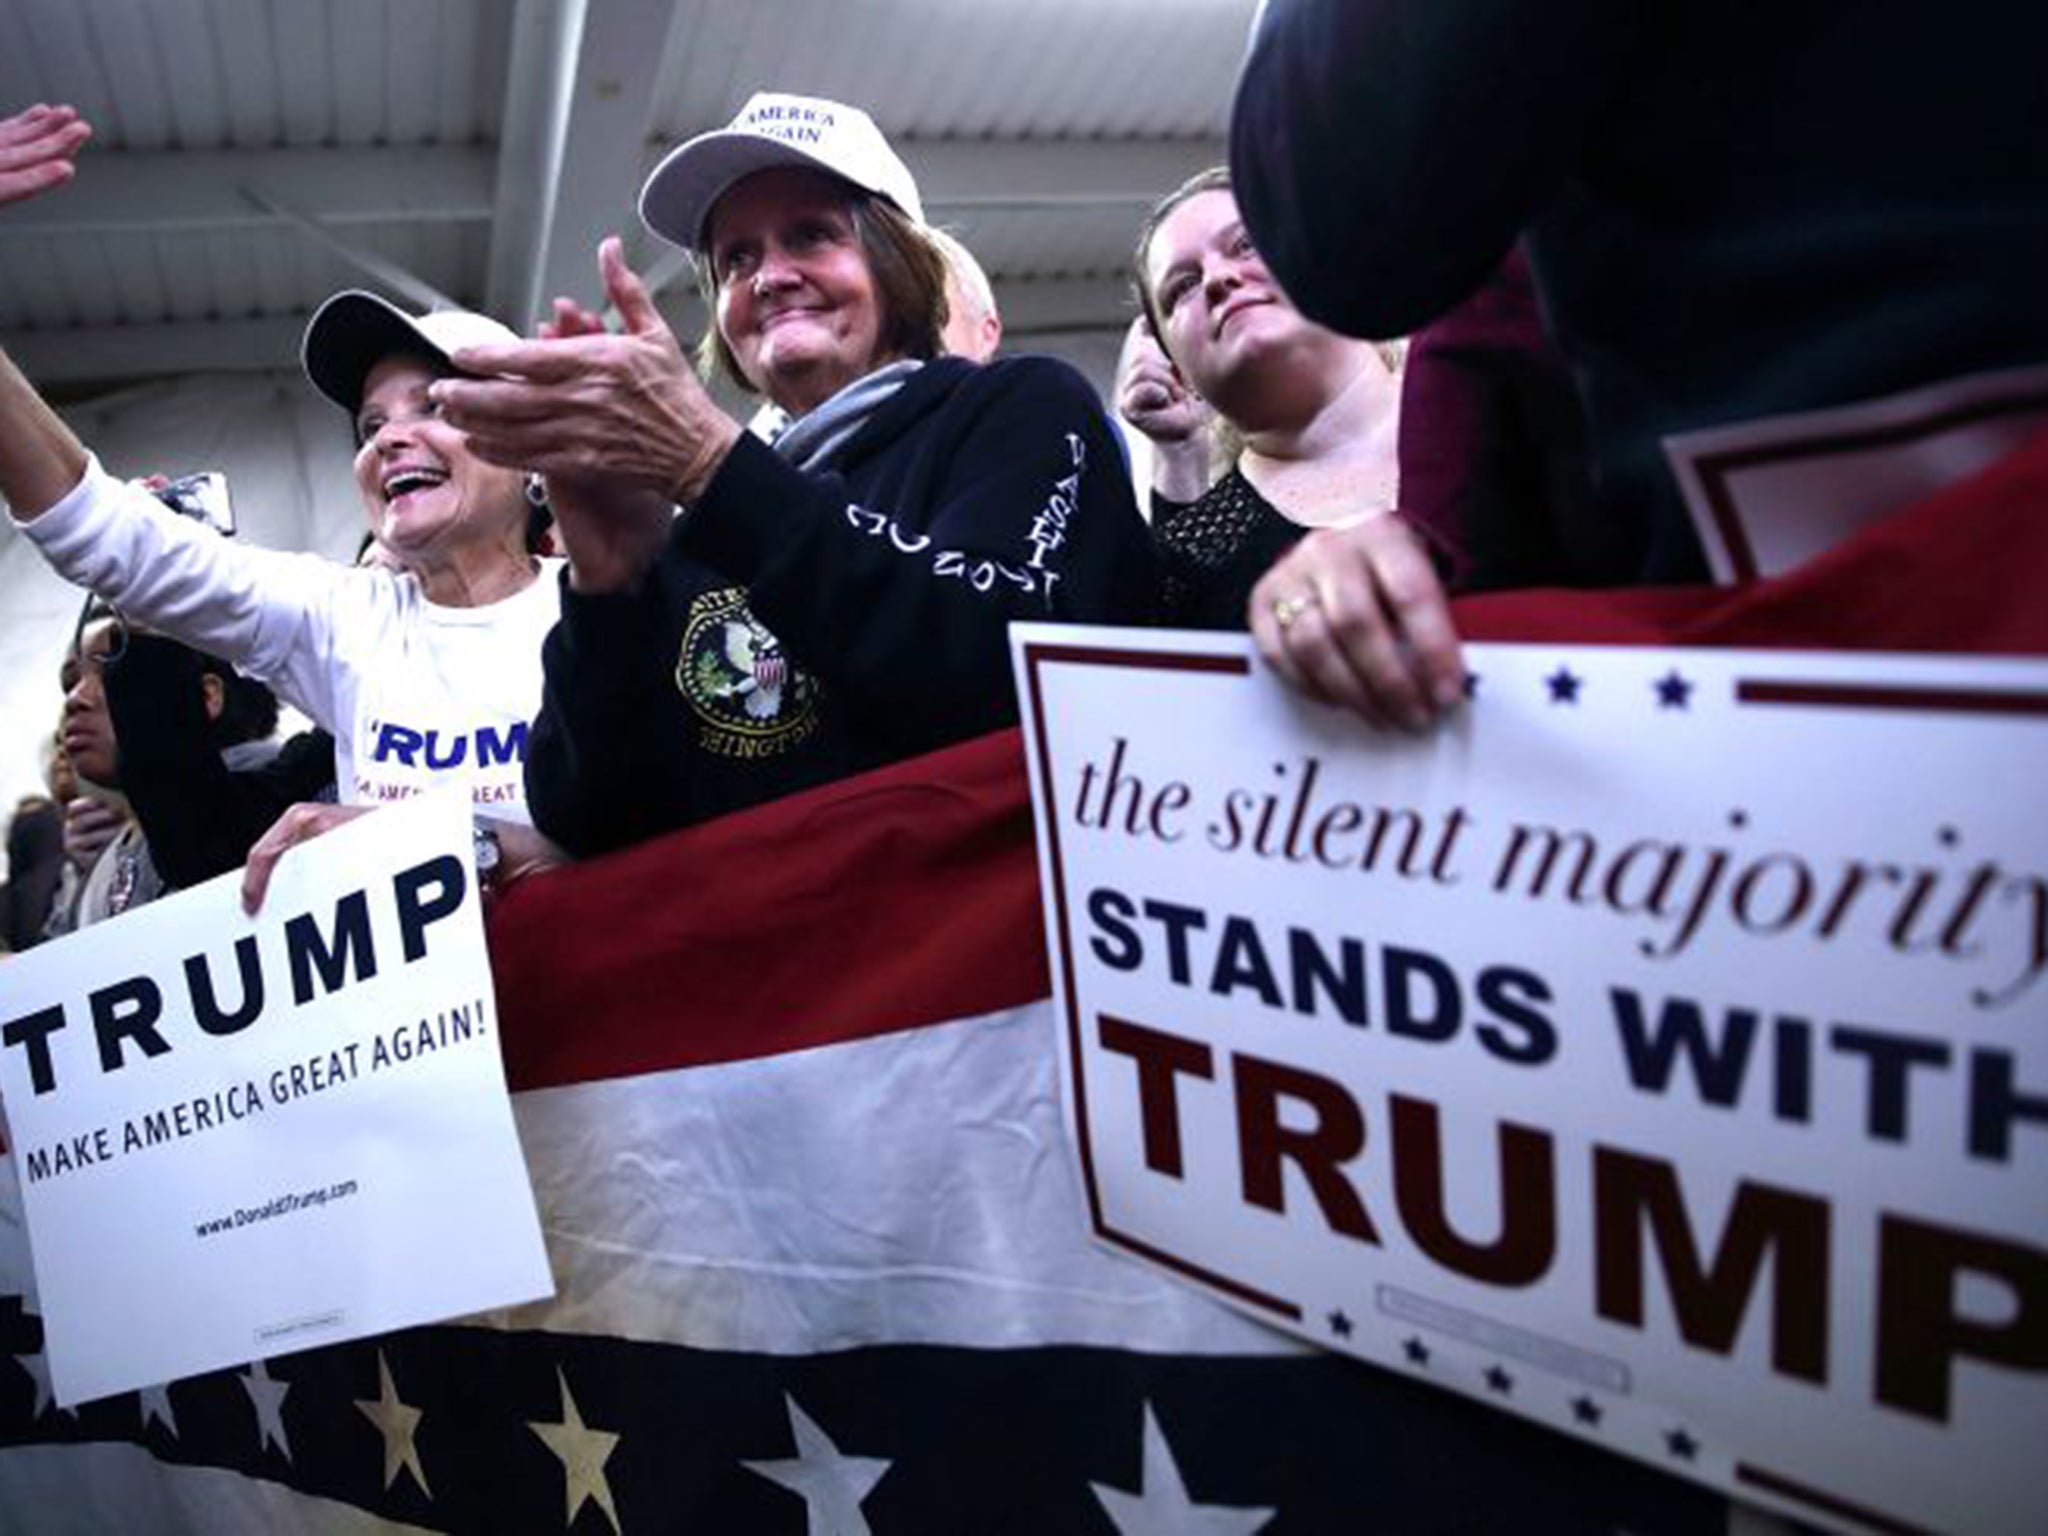 Supporters of Donald Trump listen on during a campaign rally in December